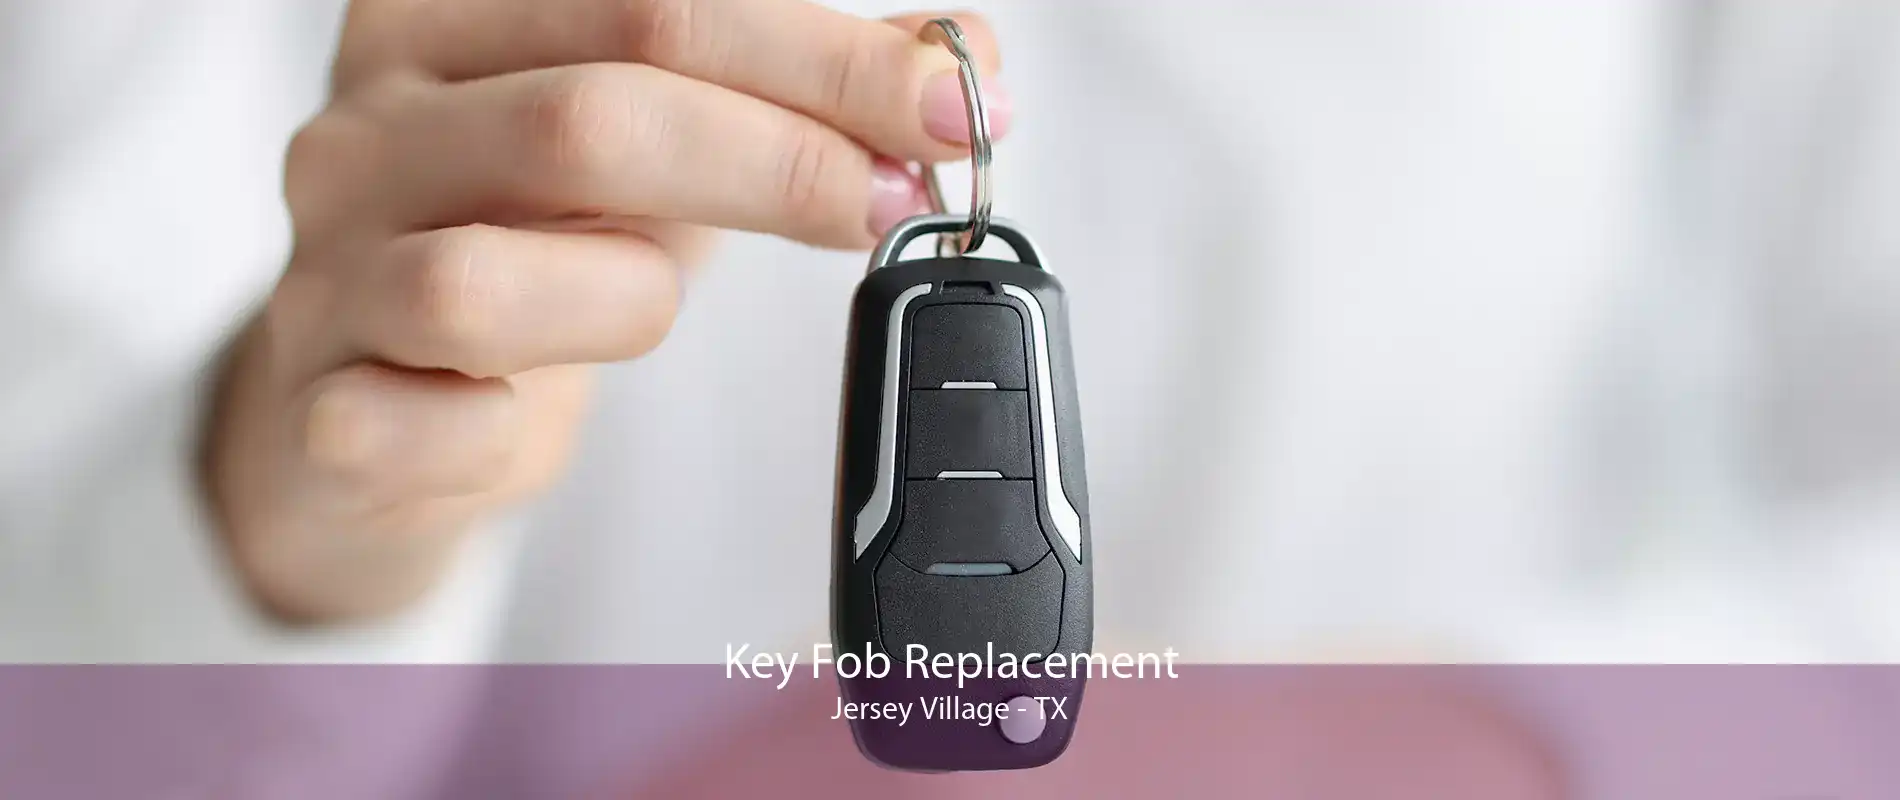 Key Fob Replacement Jersey Village - TX